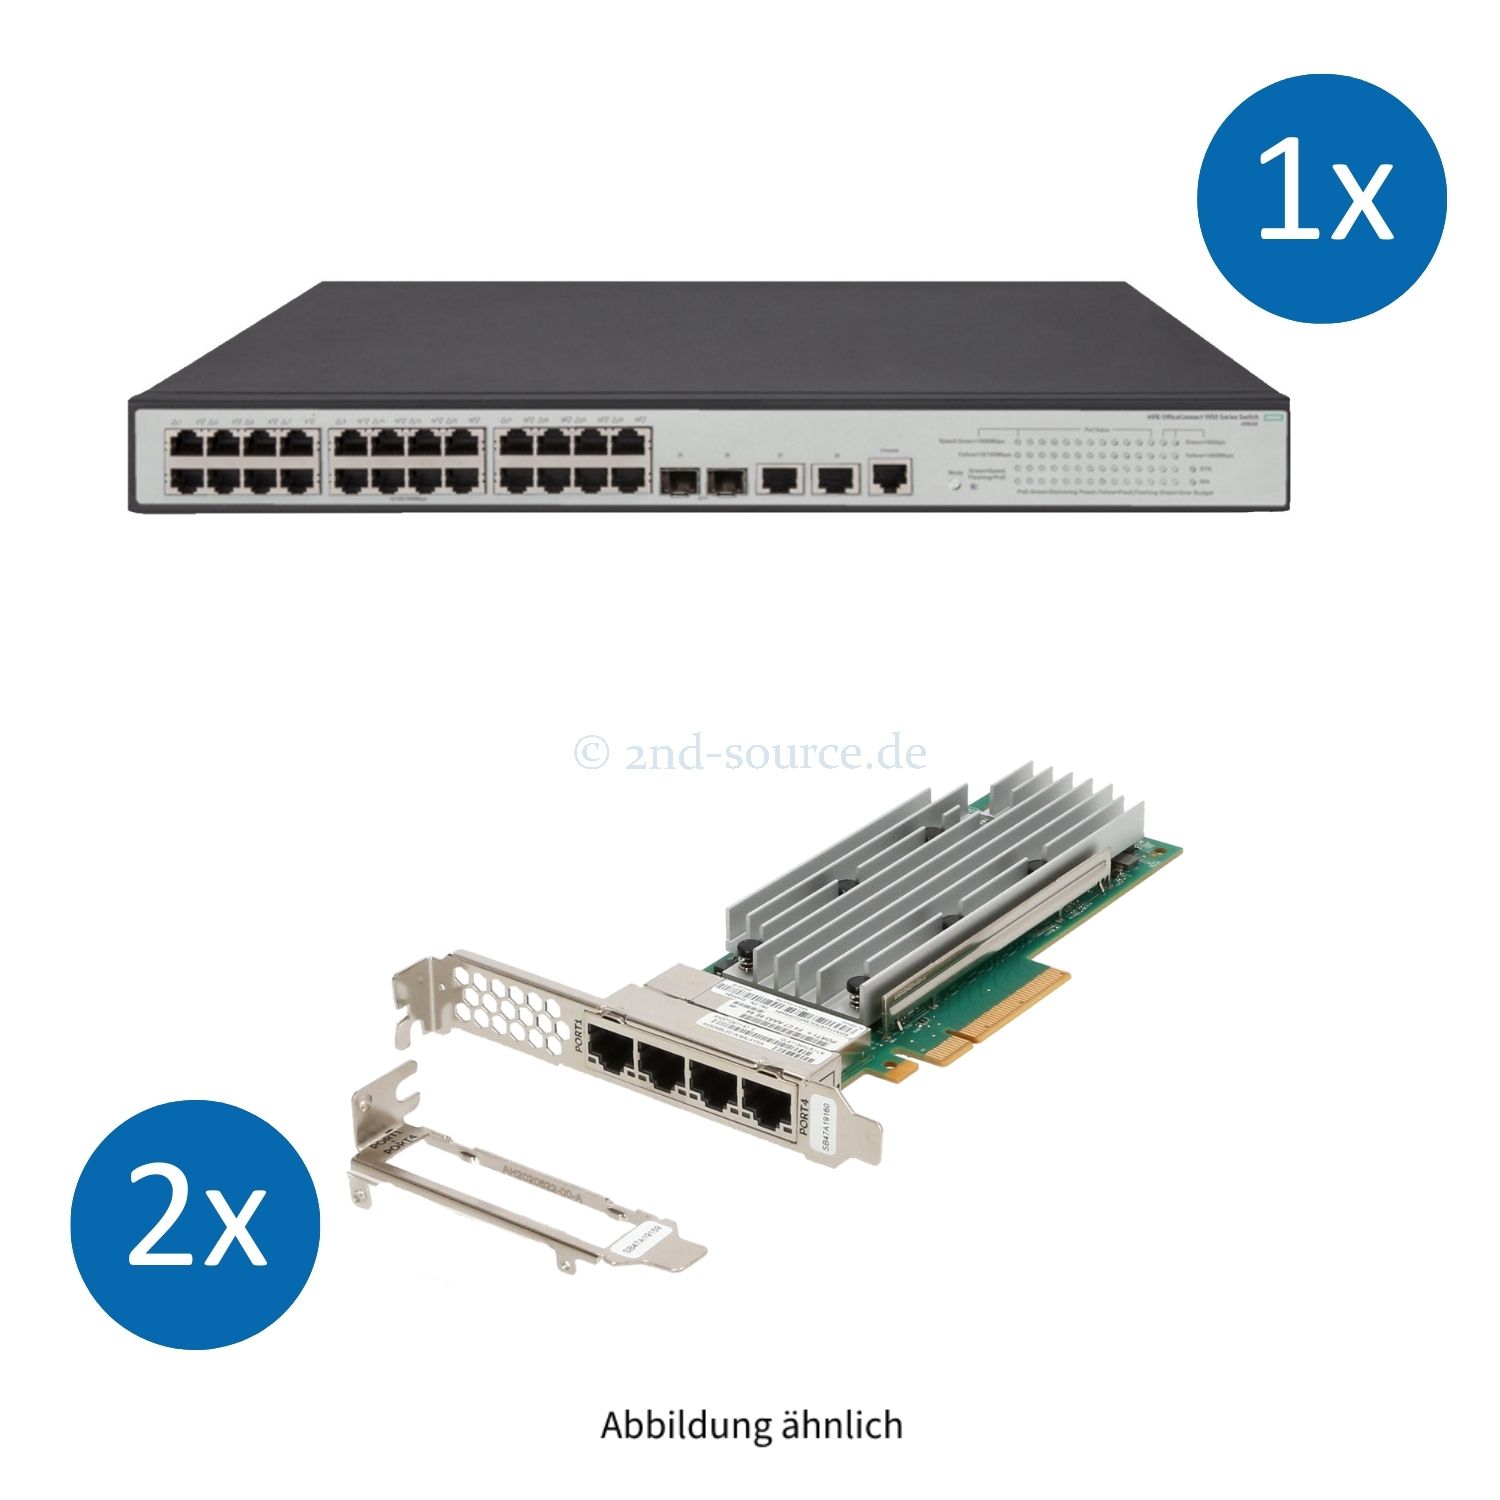 Starterkit "S" 1x HPE OfficeConnect 1950 24x 1000Base-T PoE+ 2x 10GBase-T 2x SFP+ Managed Switch und 2x QLogic QL41134 4x 10GBase-T PCIe Server Ethernet Adapter